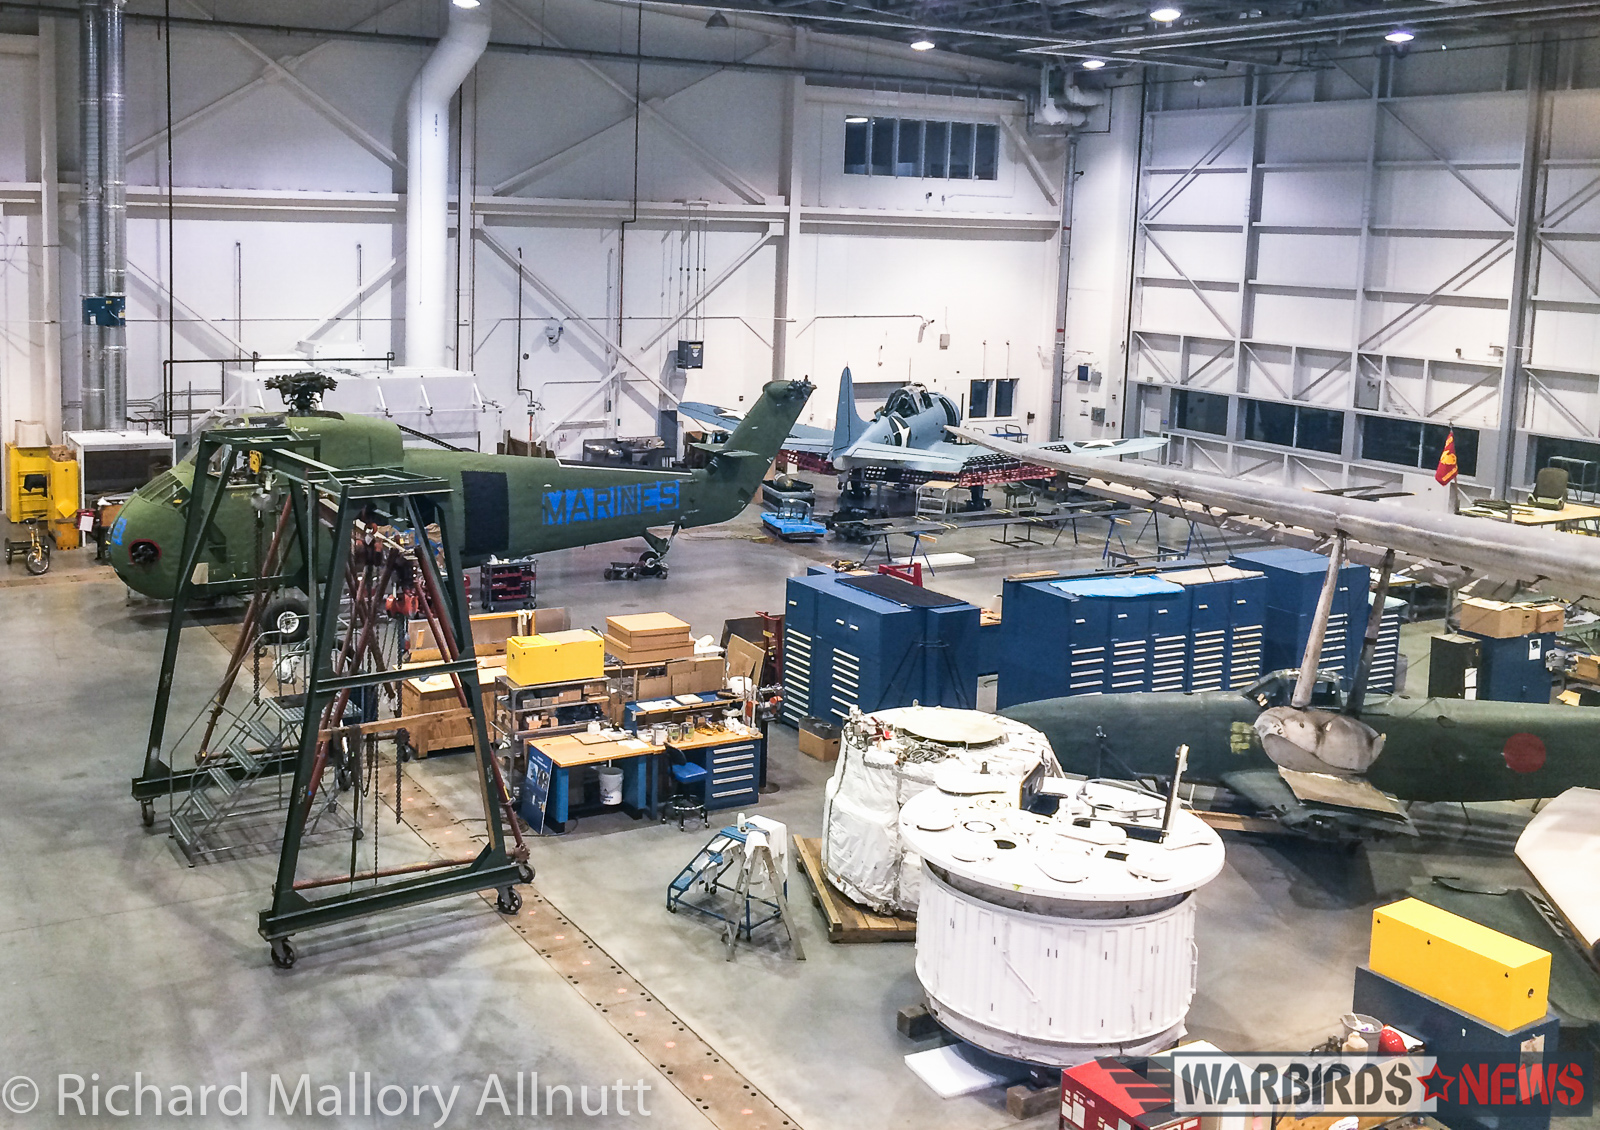 The National Museum of the United States Marine Corps' SBD Dauntless and H-34 can be seen in the distance. The H-34 was airworthy, until fairly recently, but couldn't find a buyer so the owners donated her to the Corps. She, along with the Dauntless, will soon be going on display in the main atrium of their new home. (photo by Richard Mallory Allnutt)